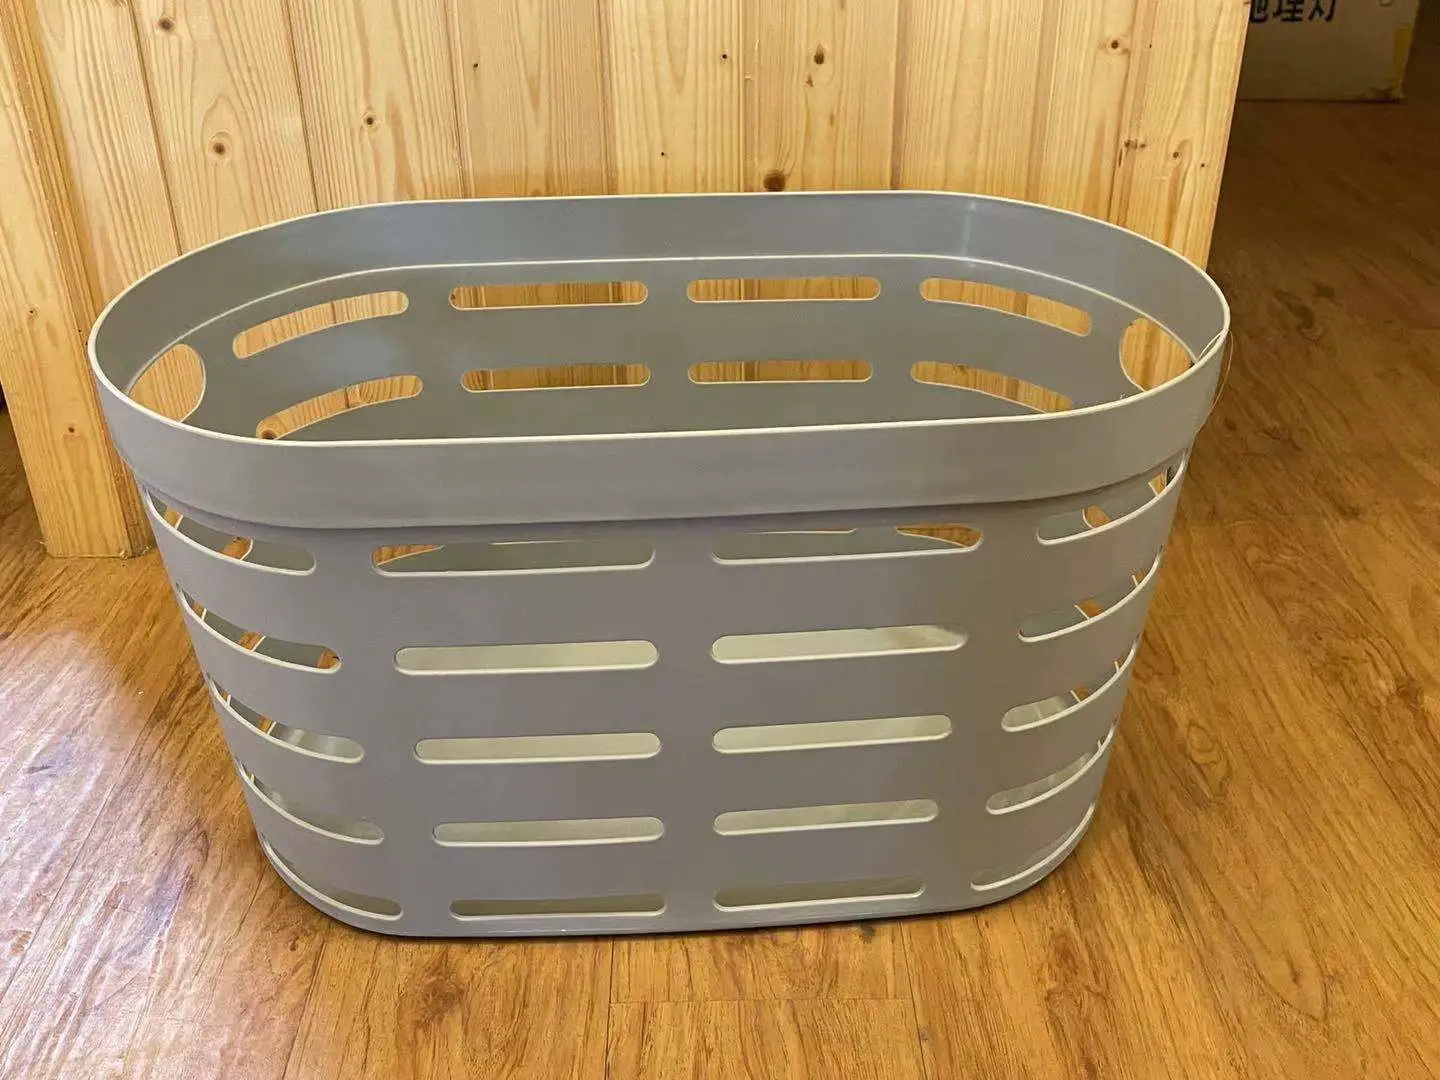 Plastic Wicker Laundry Basket Is Harvested From Renewable Resources